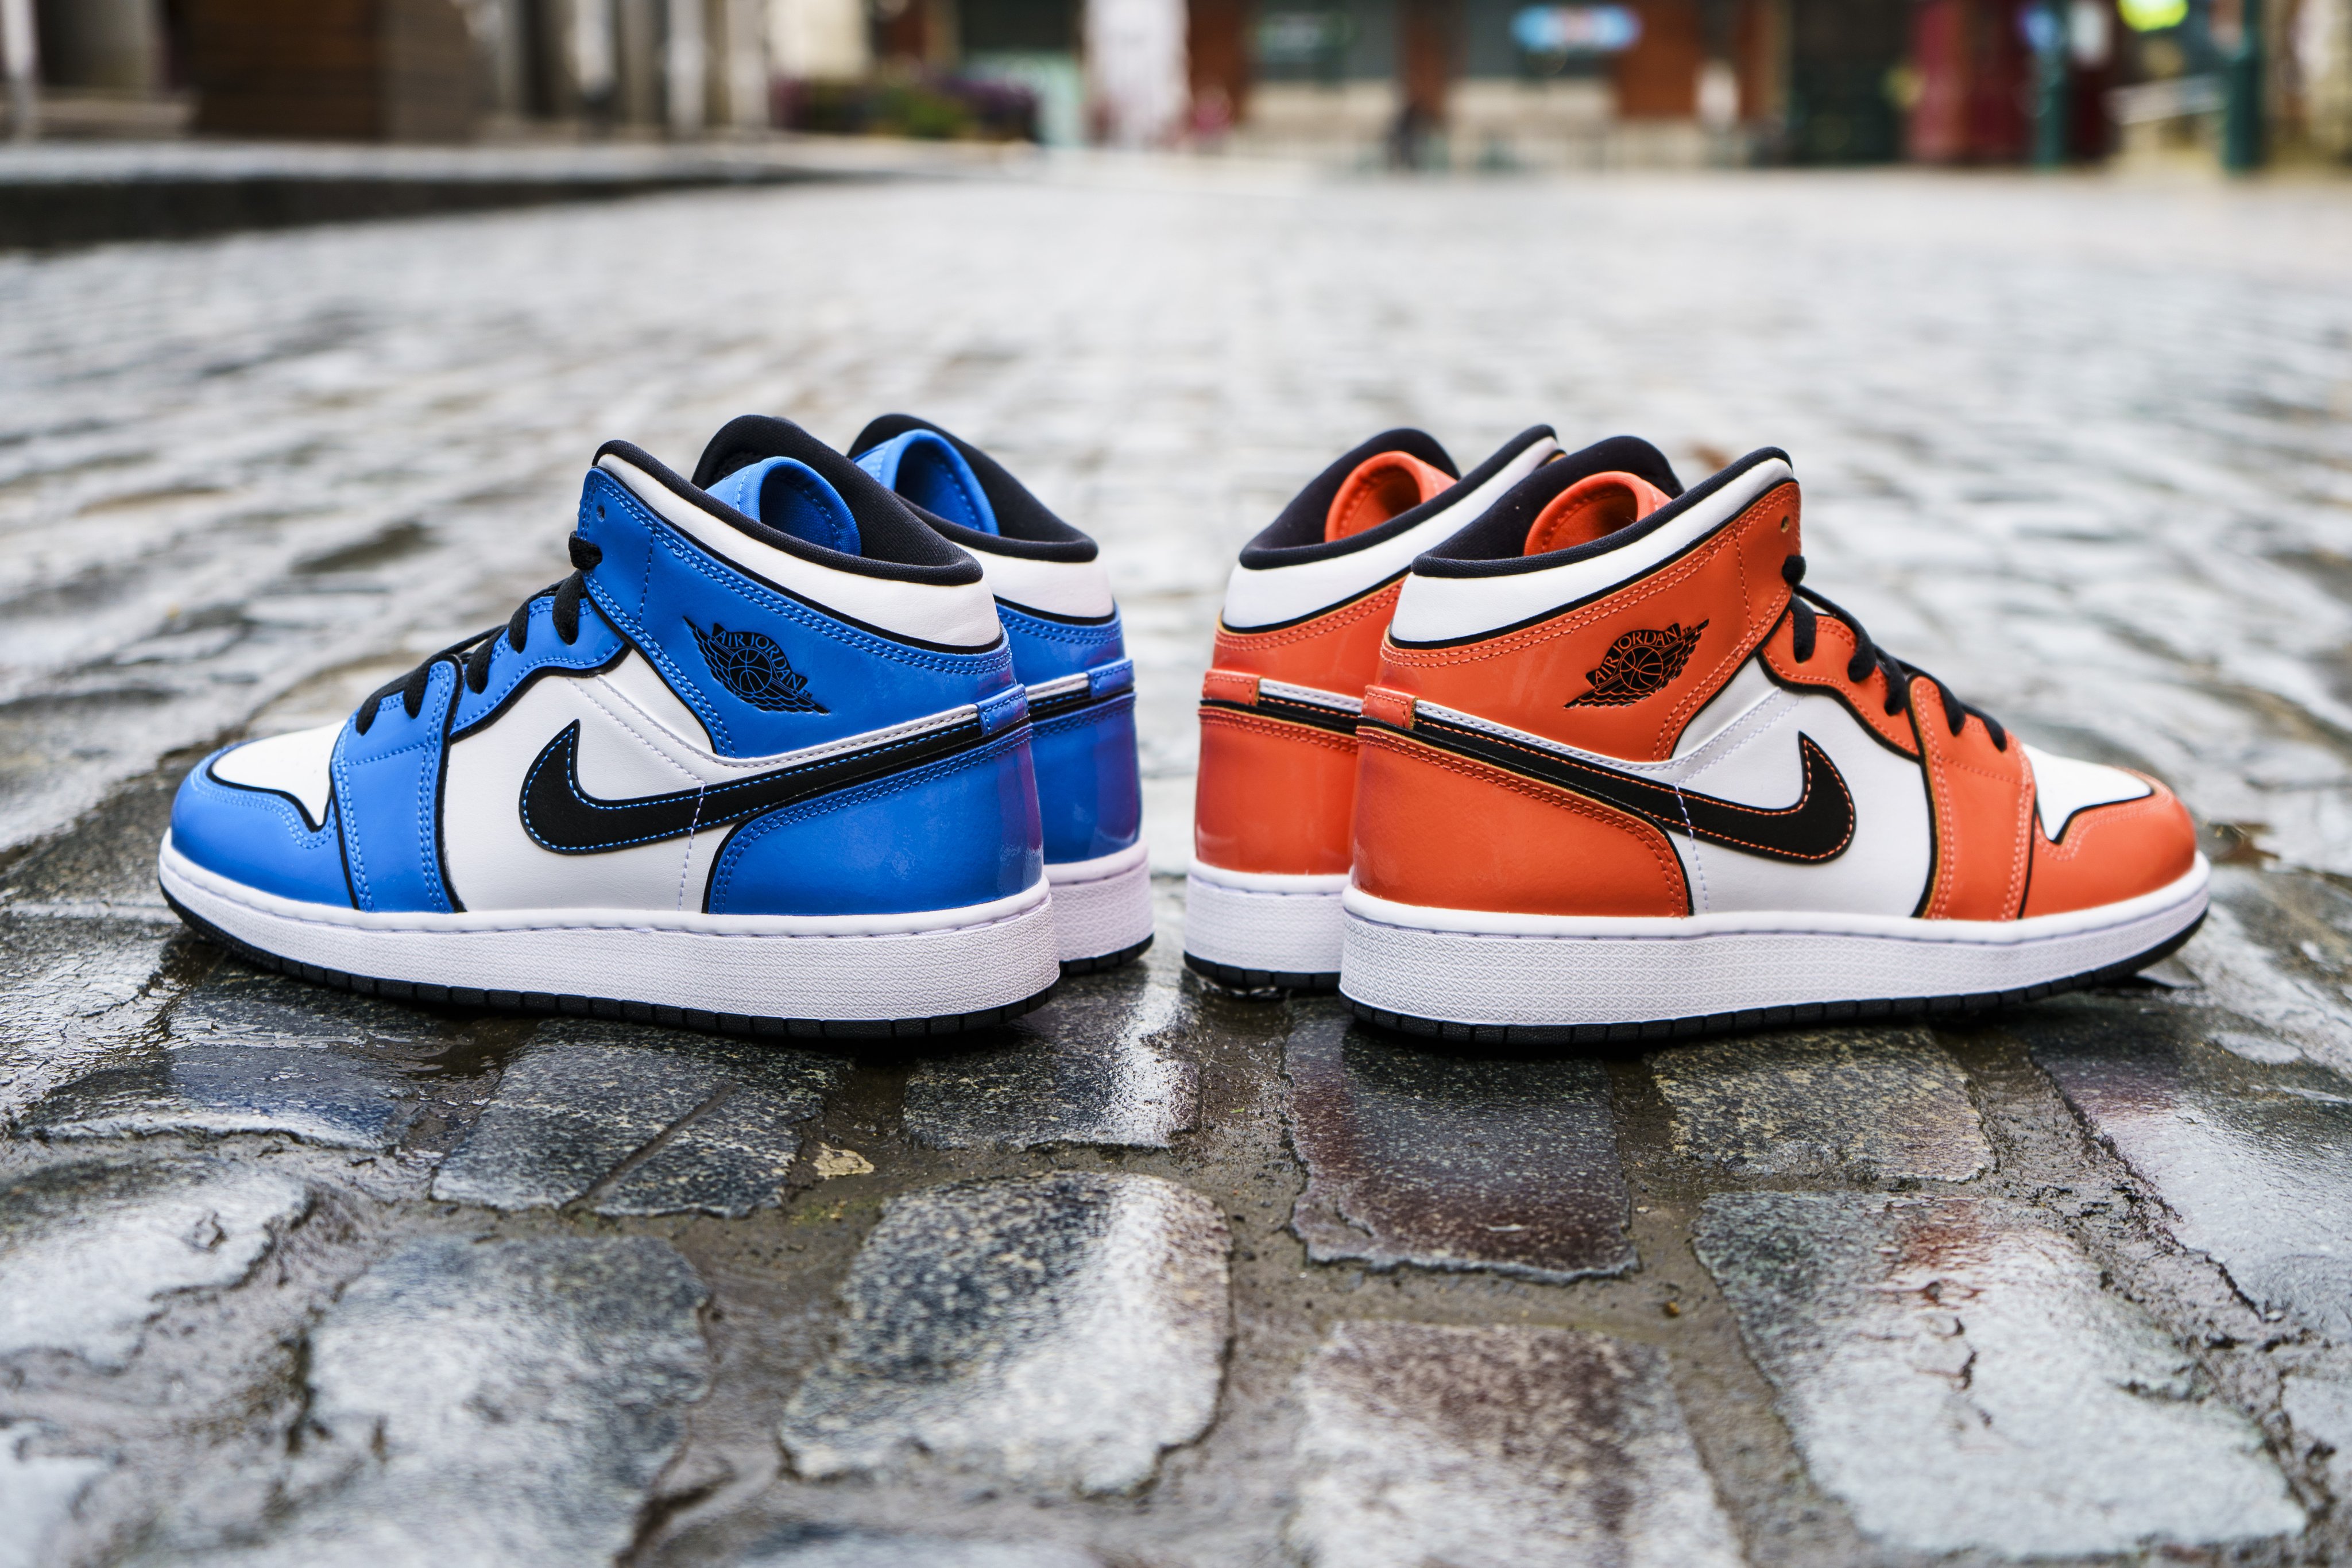 Kick Game Or The Air Jordan 1 Mid Has Landed In Two Patent Colourways Signal Blue T Co D6p8lkbmsj Turf Orange T Co 80qbbtvehp T Co 5ums0rwyfb Twitter